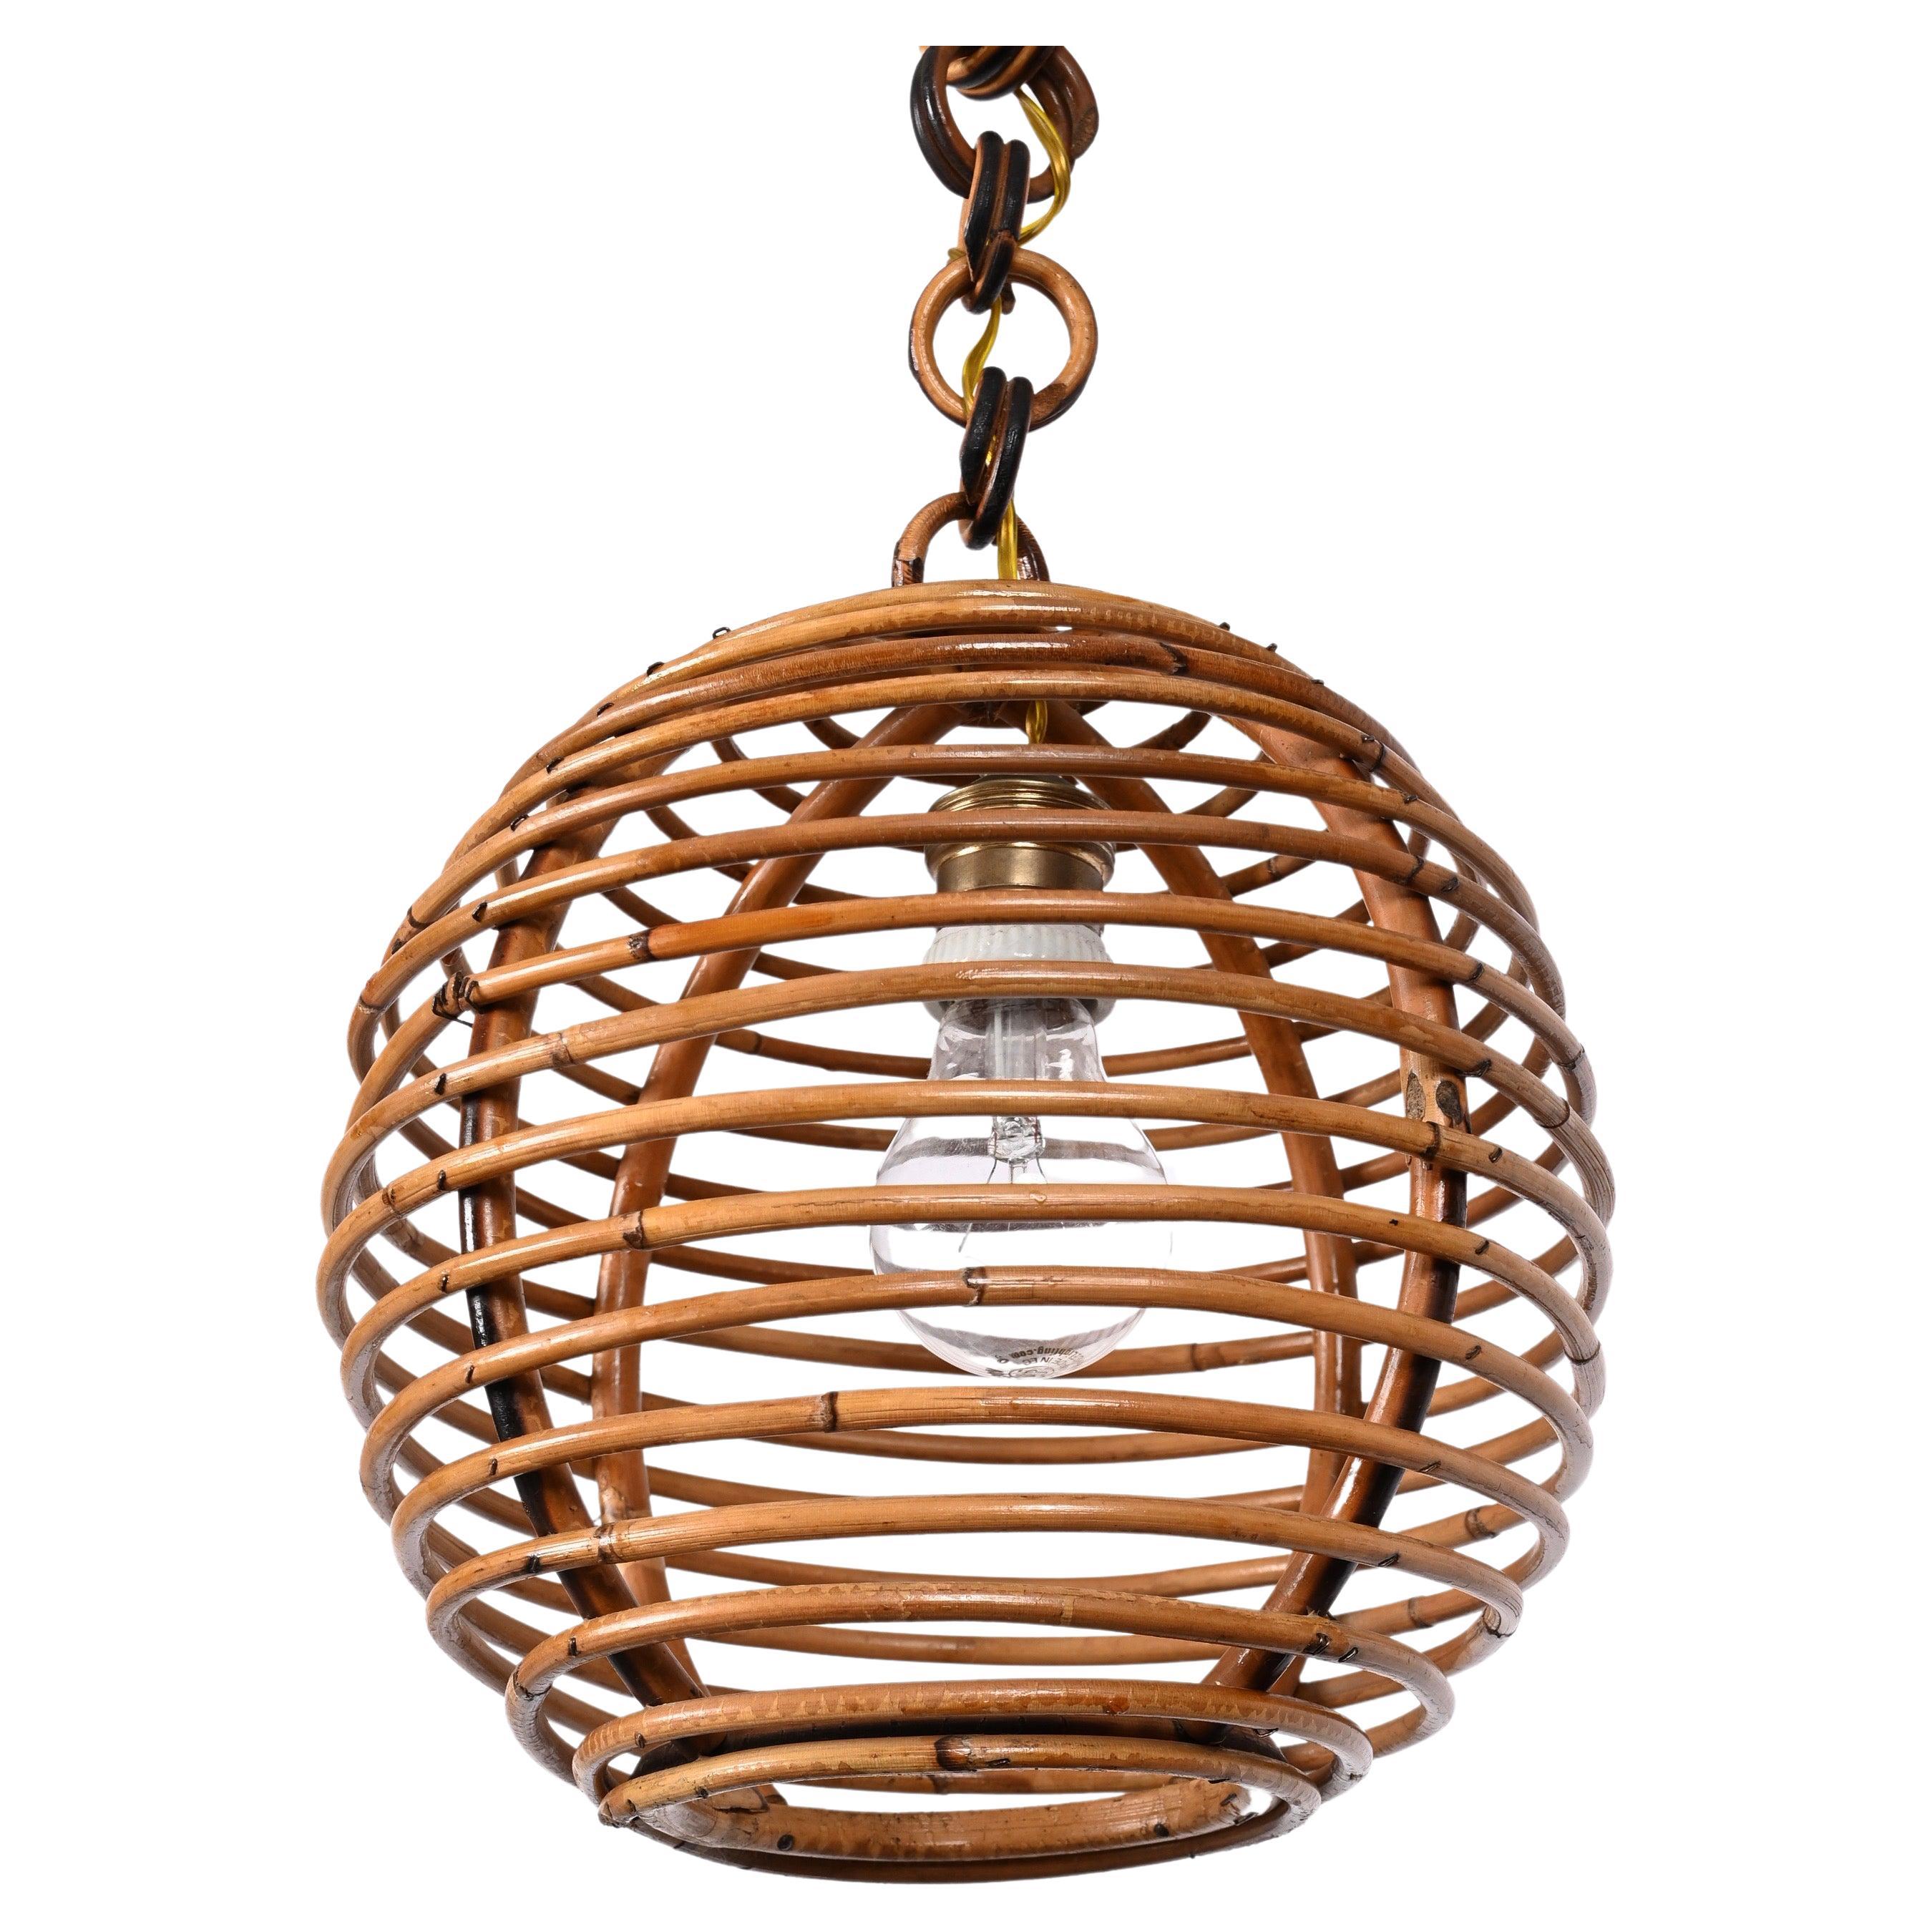 Midcentury French Riviera Bambo and Rattan Spherical Italian Chandelier, 1960s For Sale